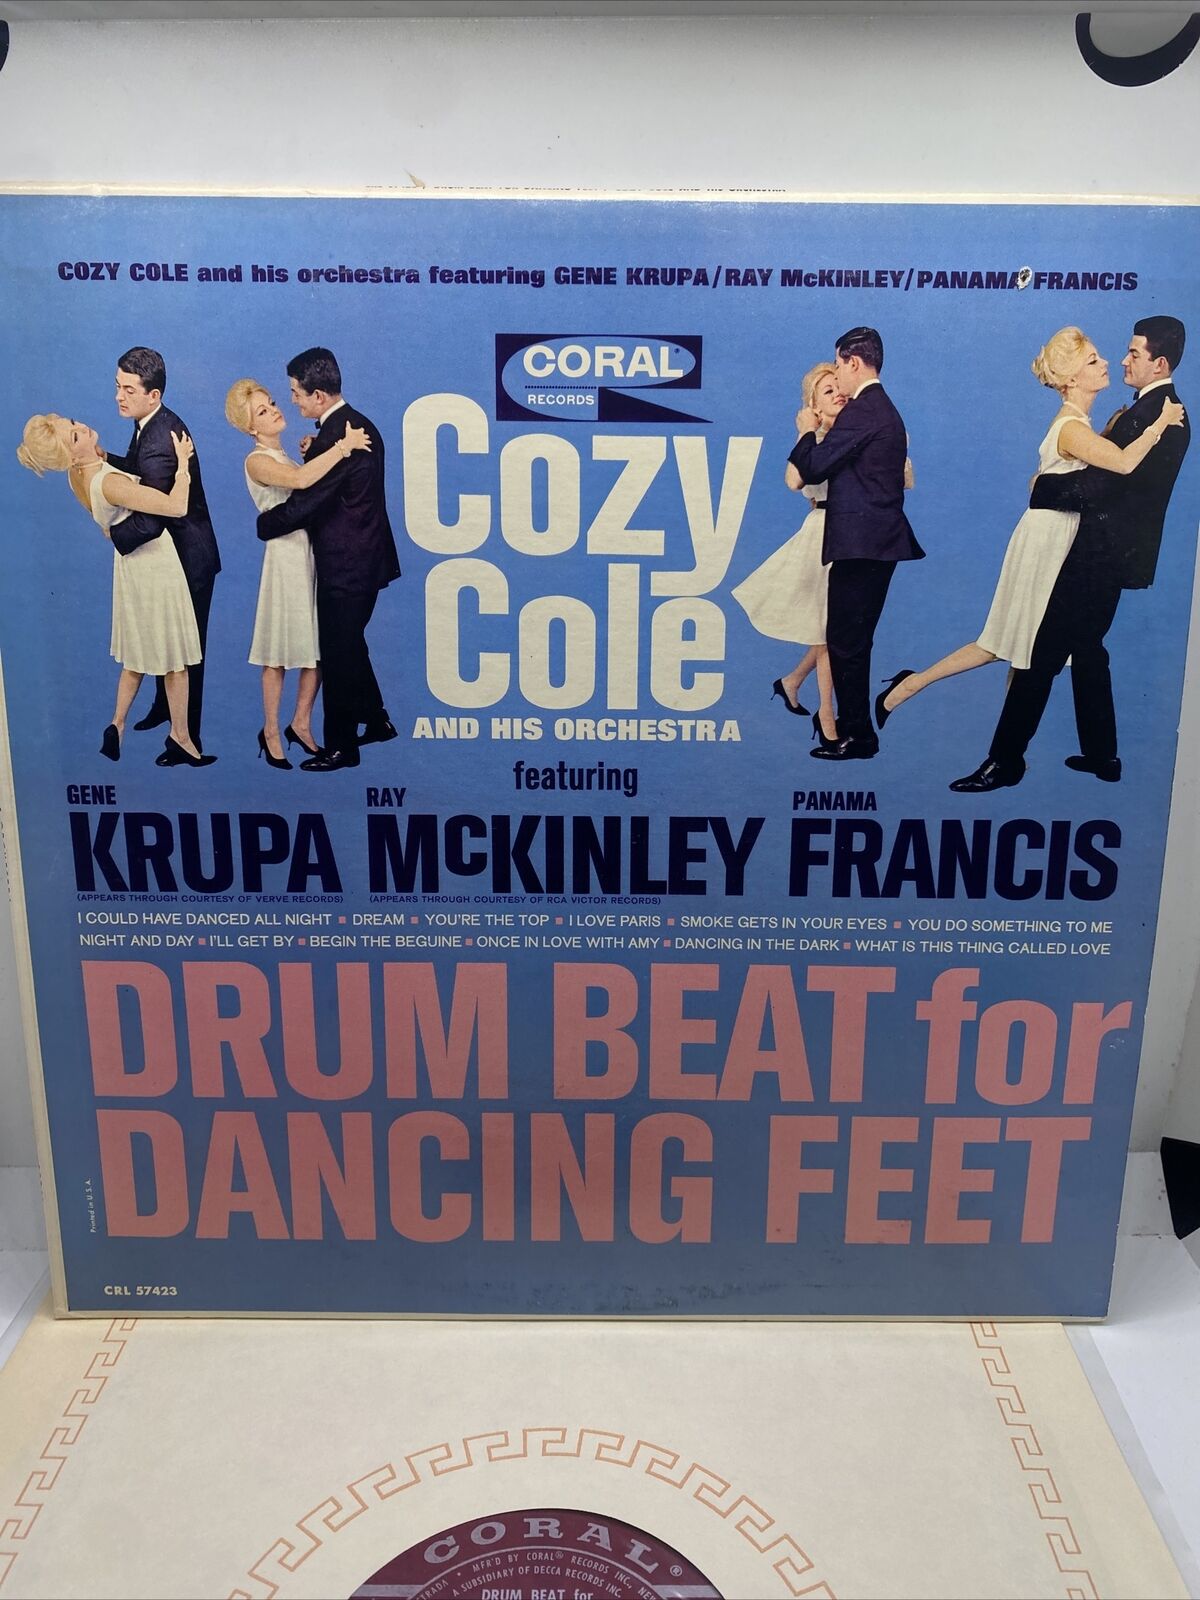 Cozy Cole Featuring Gene Krupa, Ray McKinley, Panama: Drum Beat For Dancing Feet